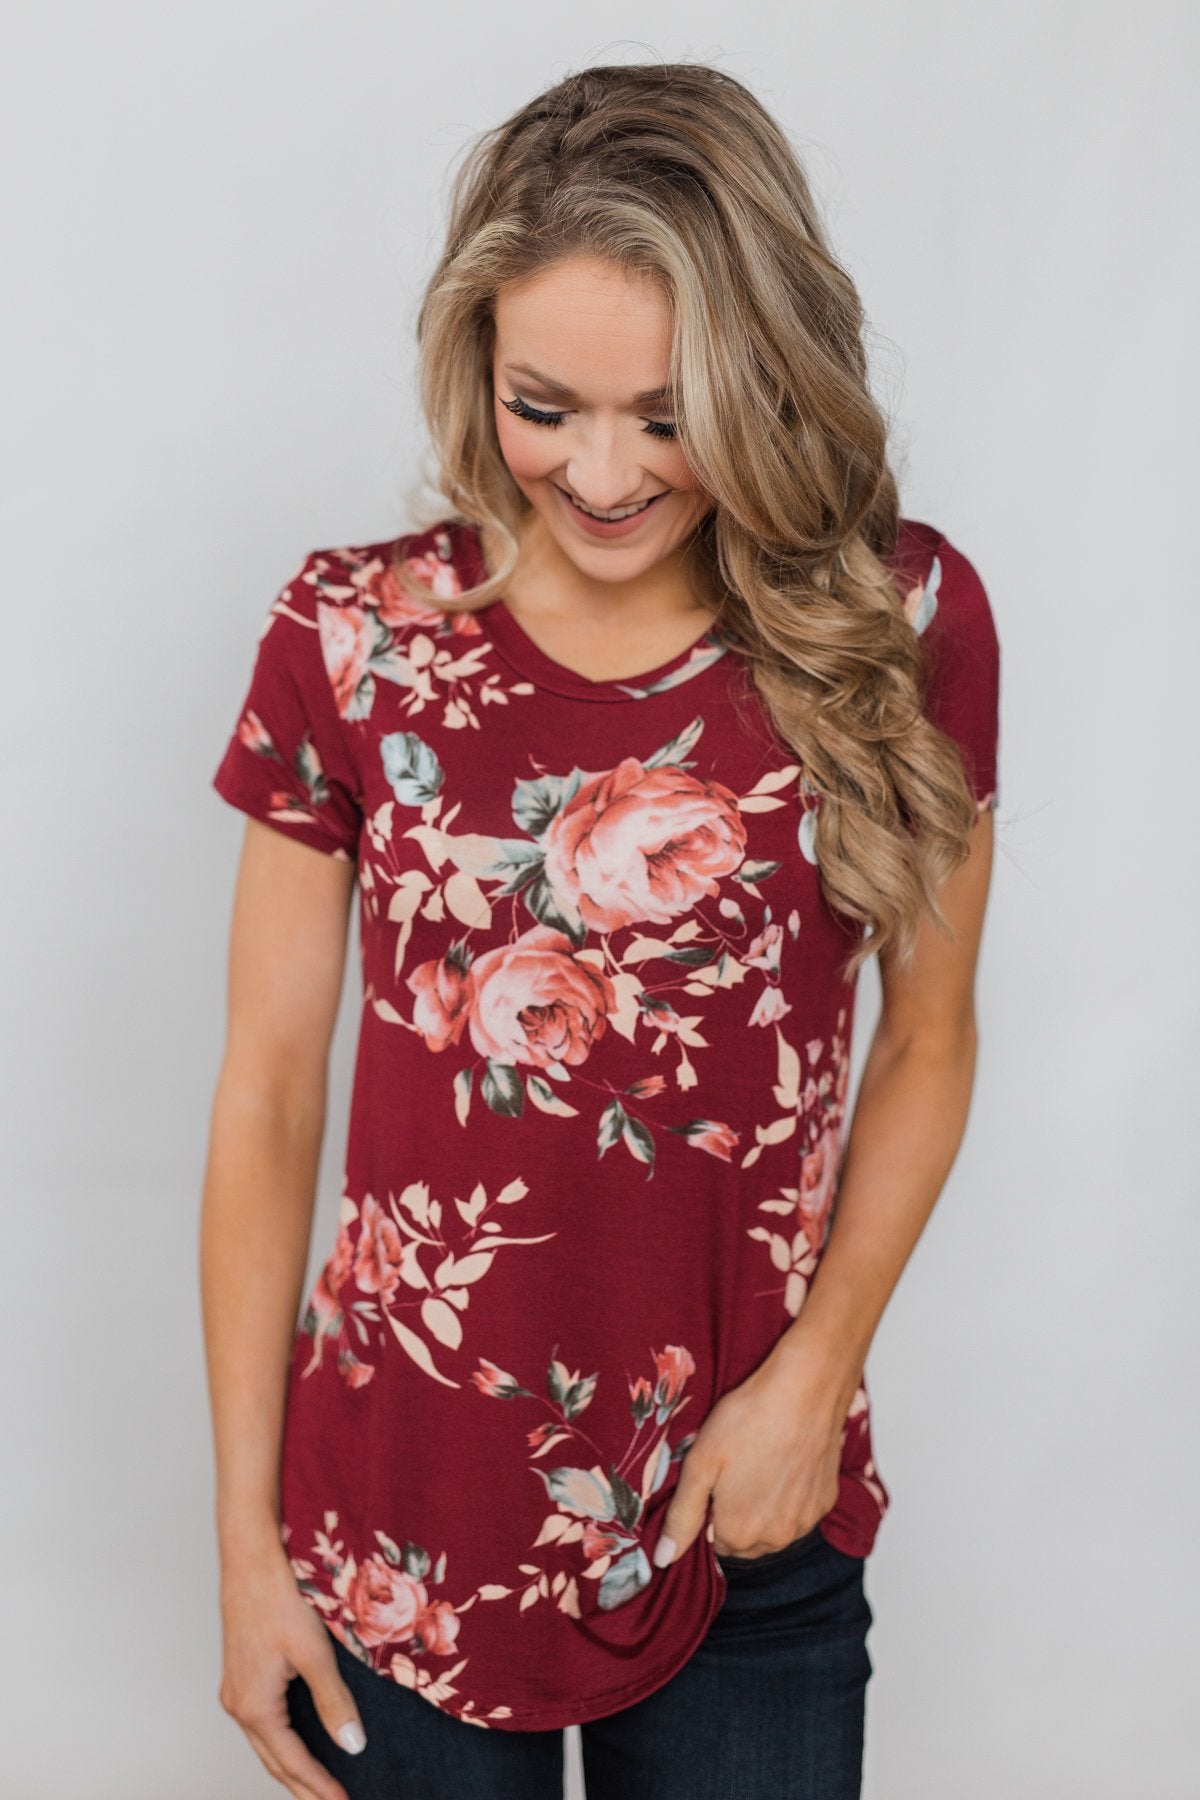 Floral Melody Short Sleeve Top - Burgundy